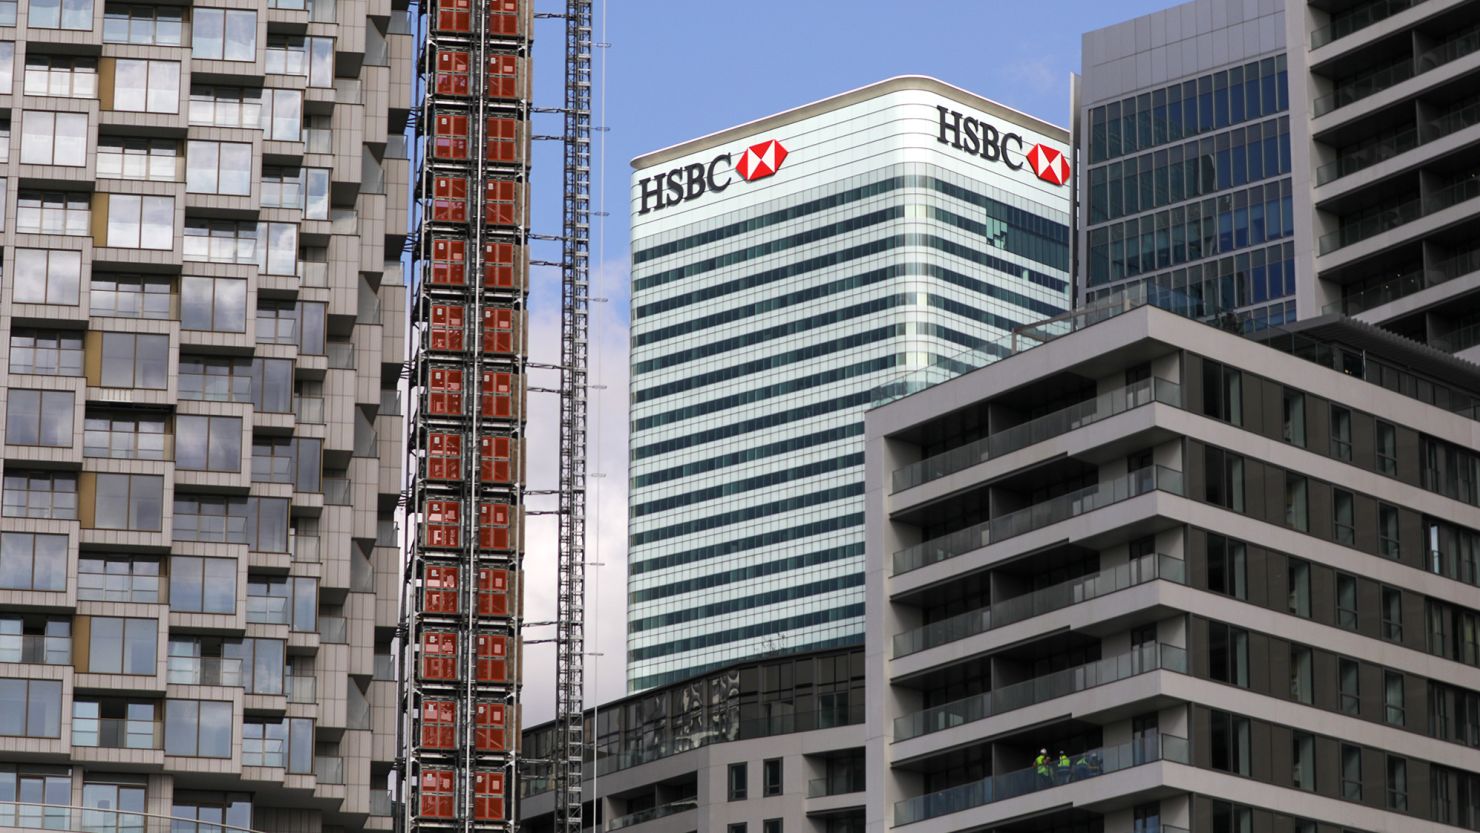 HSBC's headquarters seen in London's Canary Wharf district in 2020 